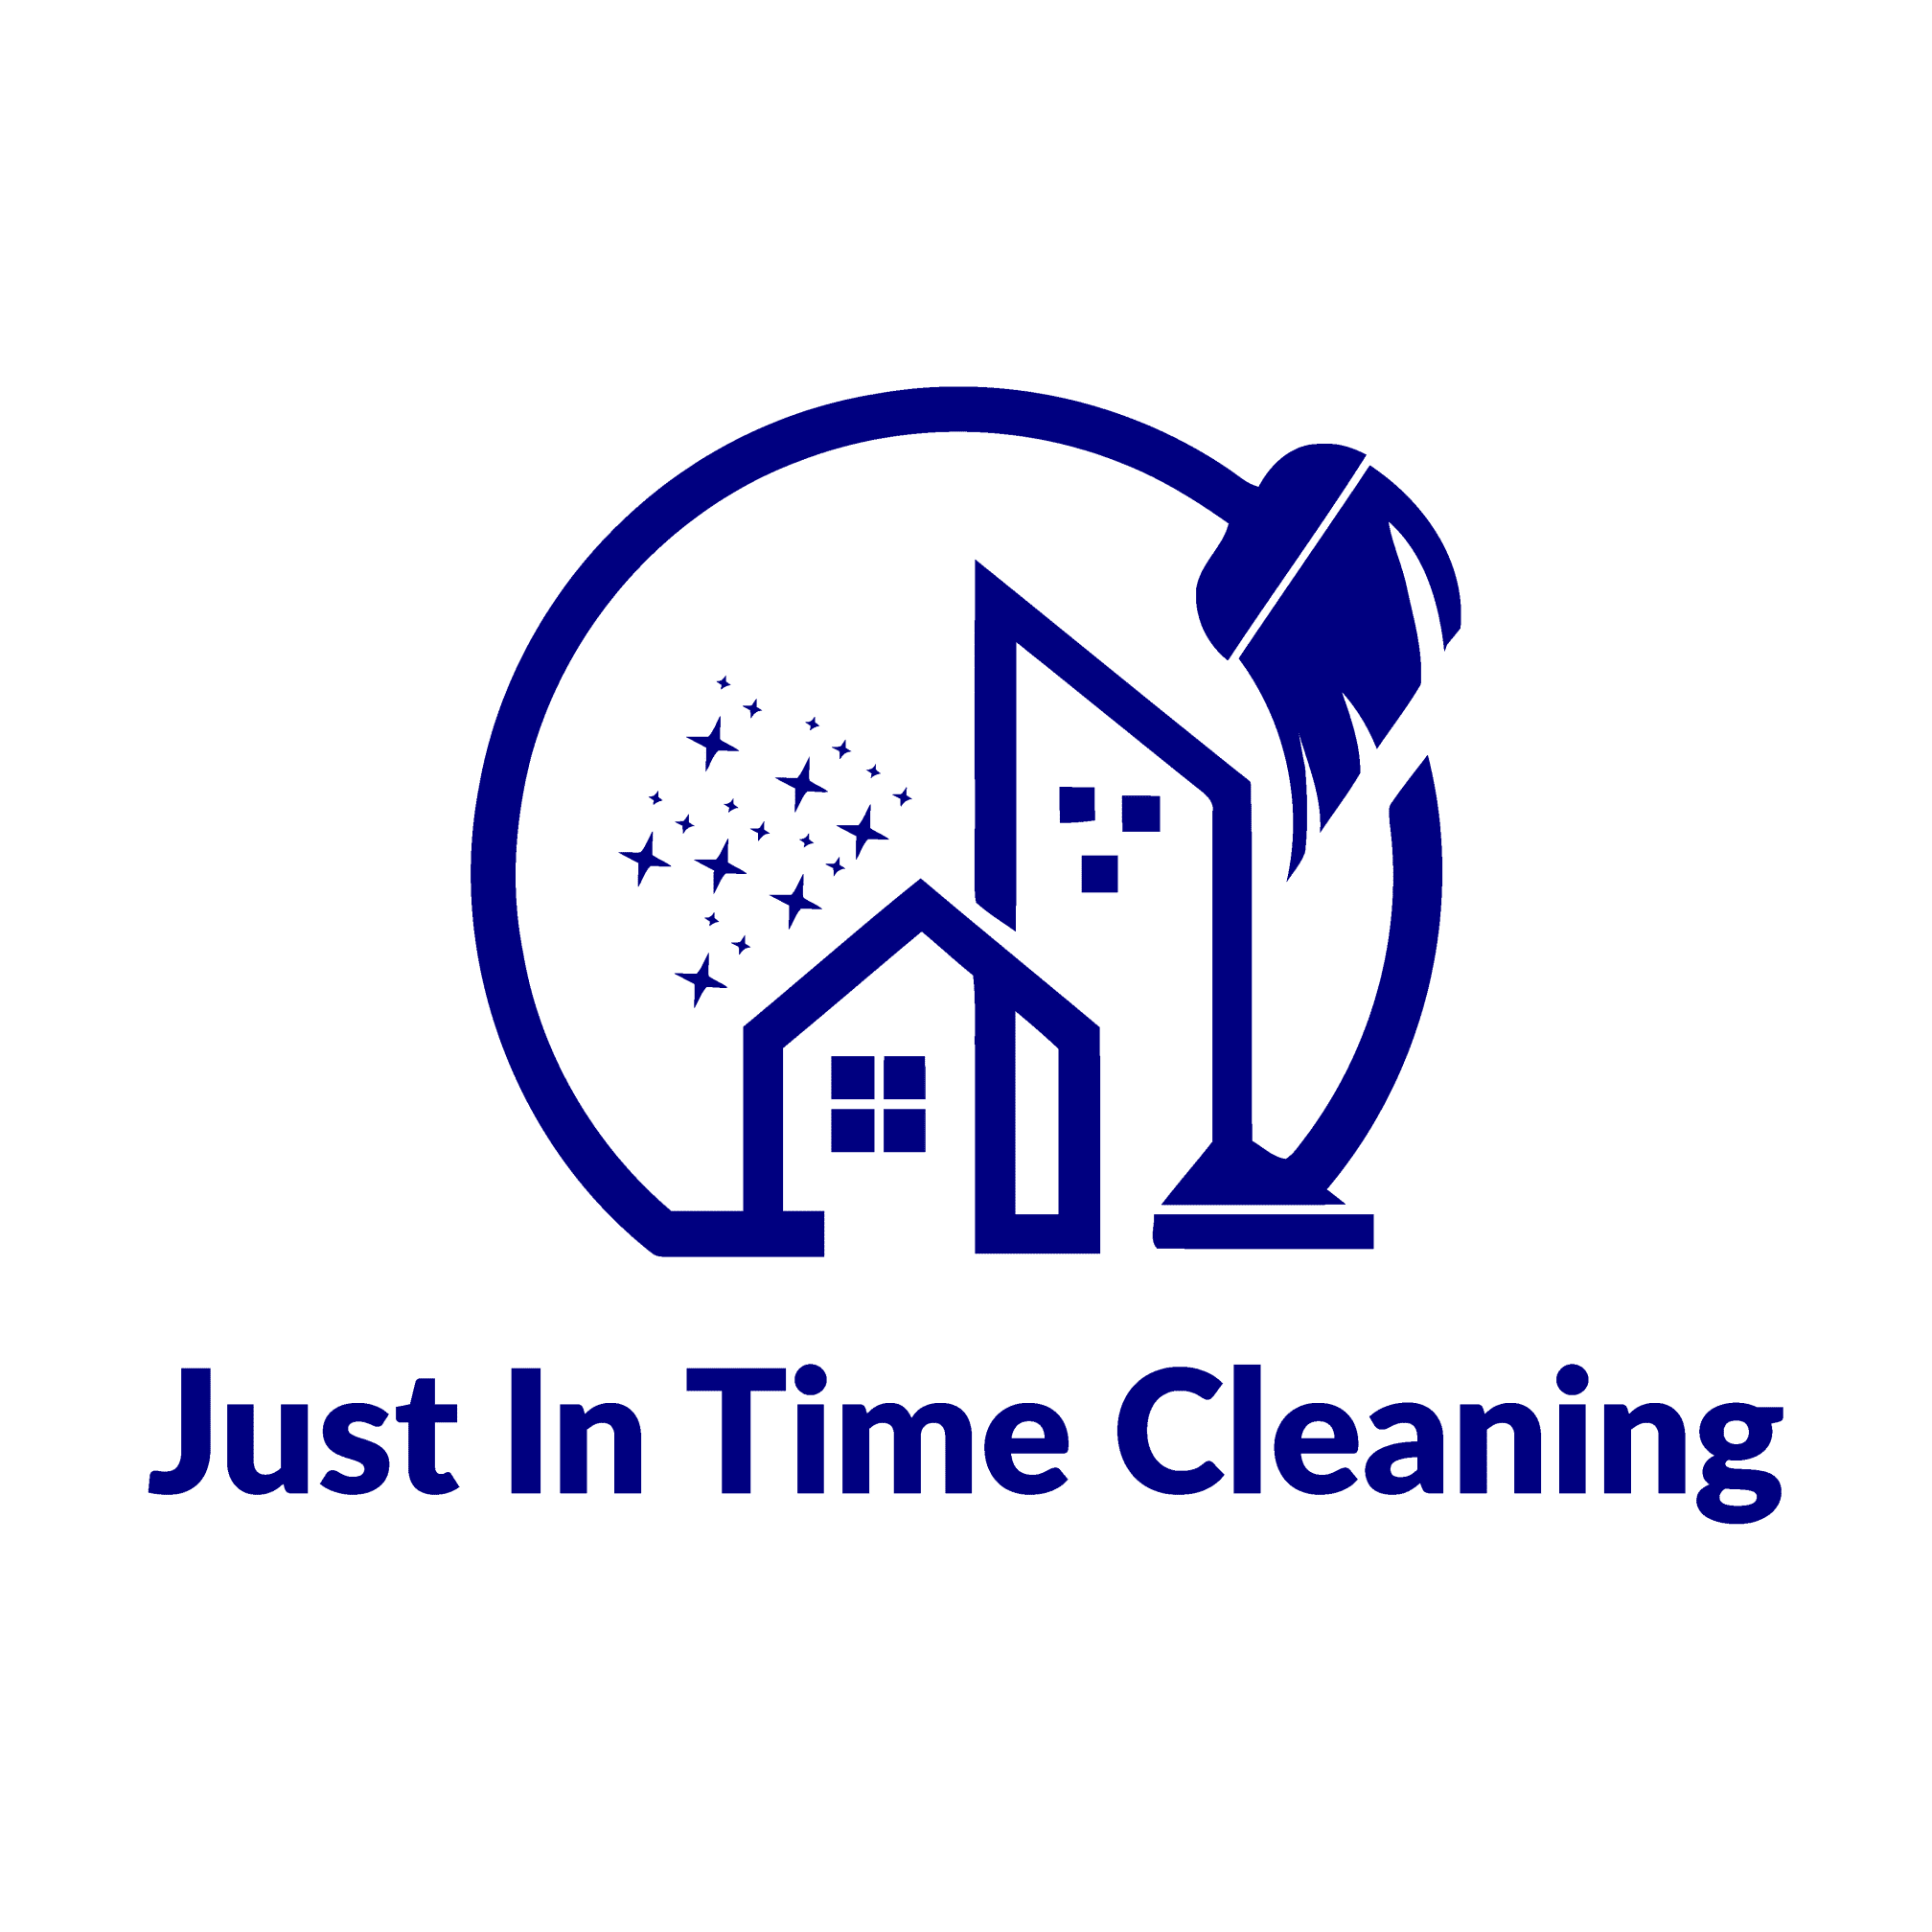 Just in Time Cleaning Ltd Logo